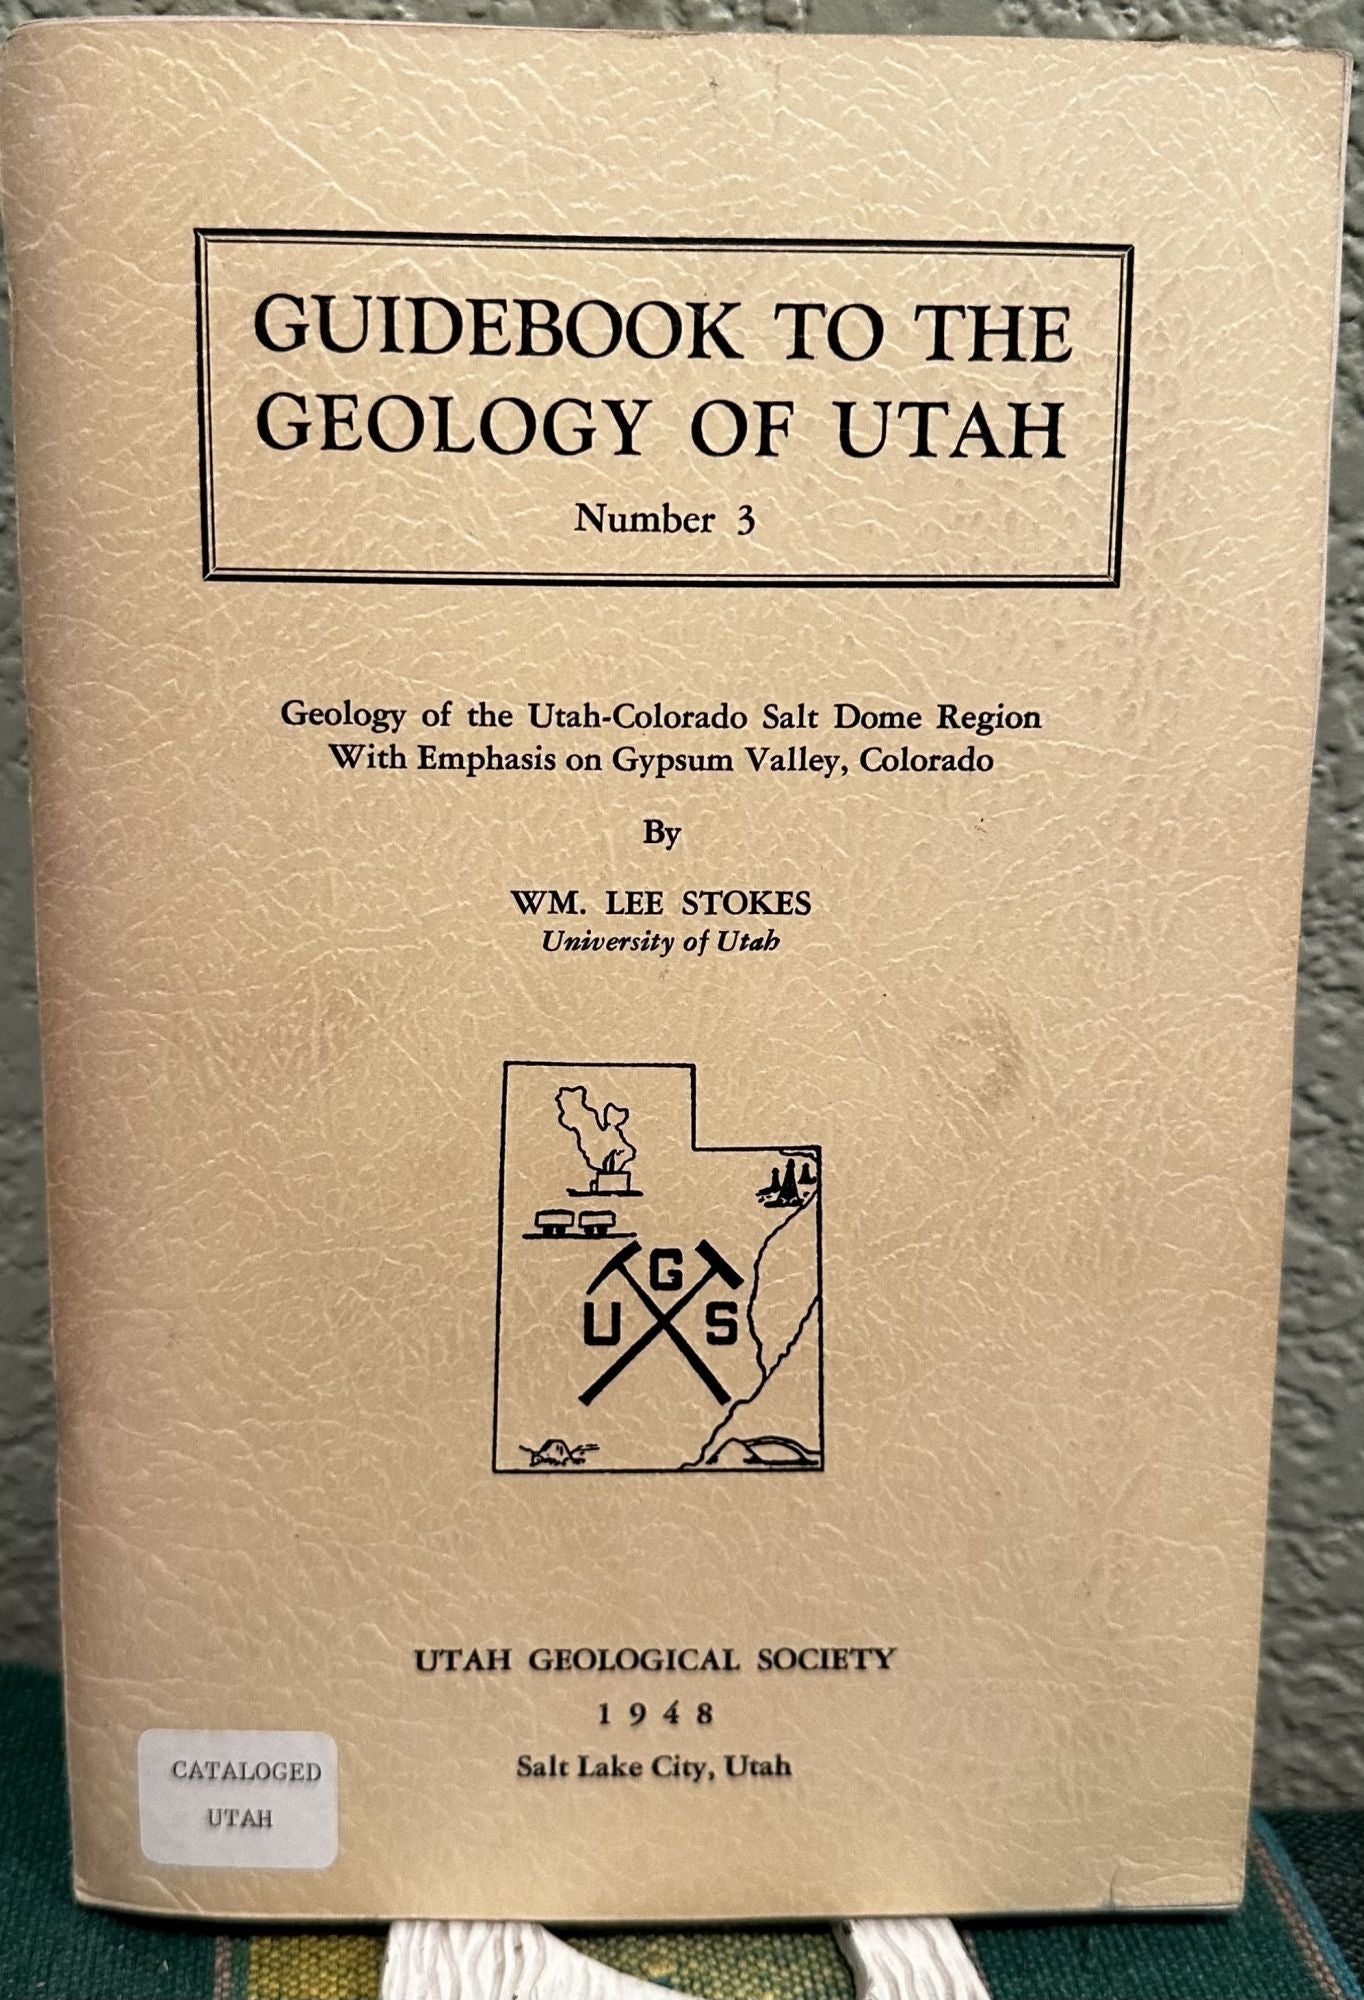 Geology of the Utah-Colorado Salt Dome Region with Emphasis on Gypsum Valley, Colorado. William Lee Stokes.